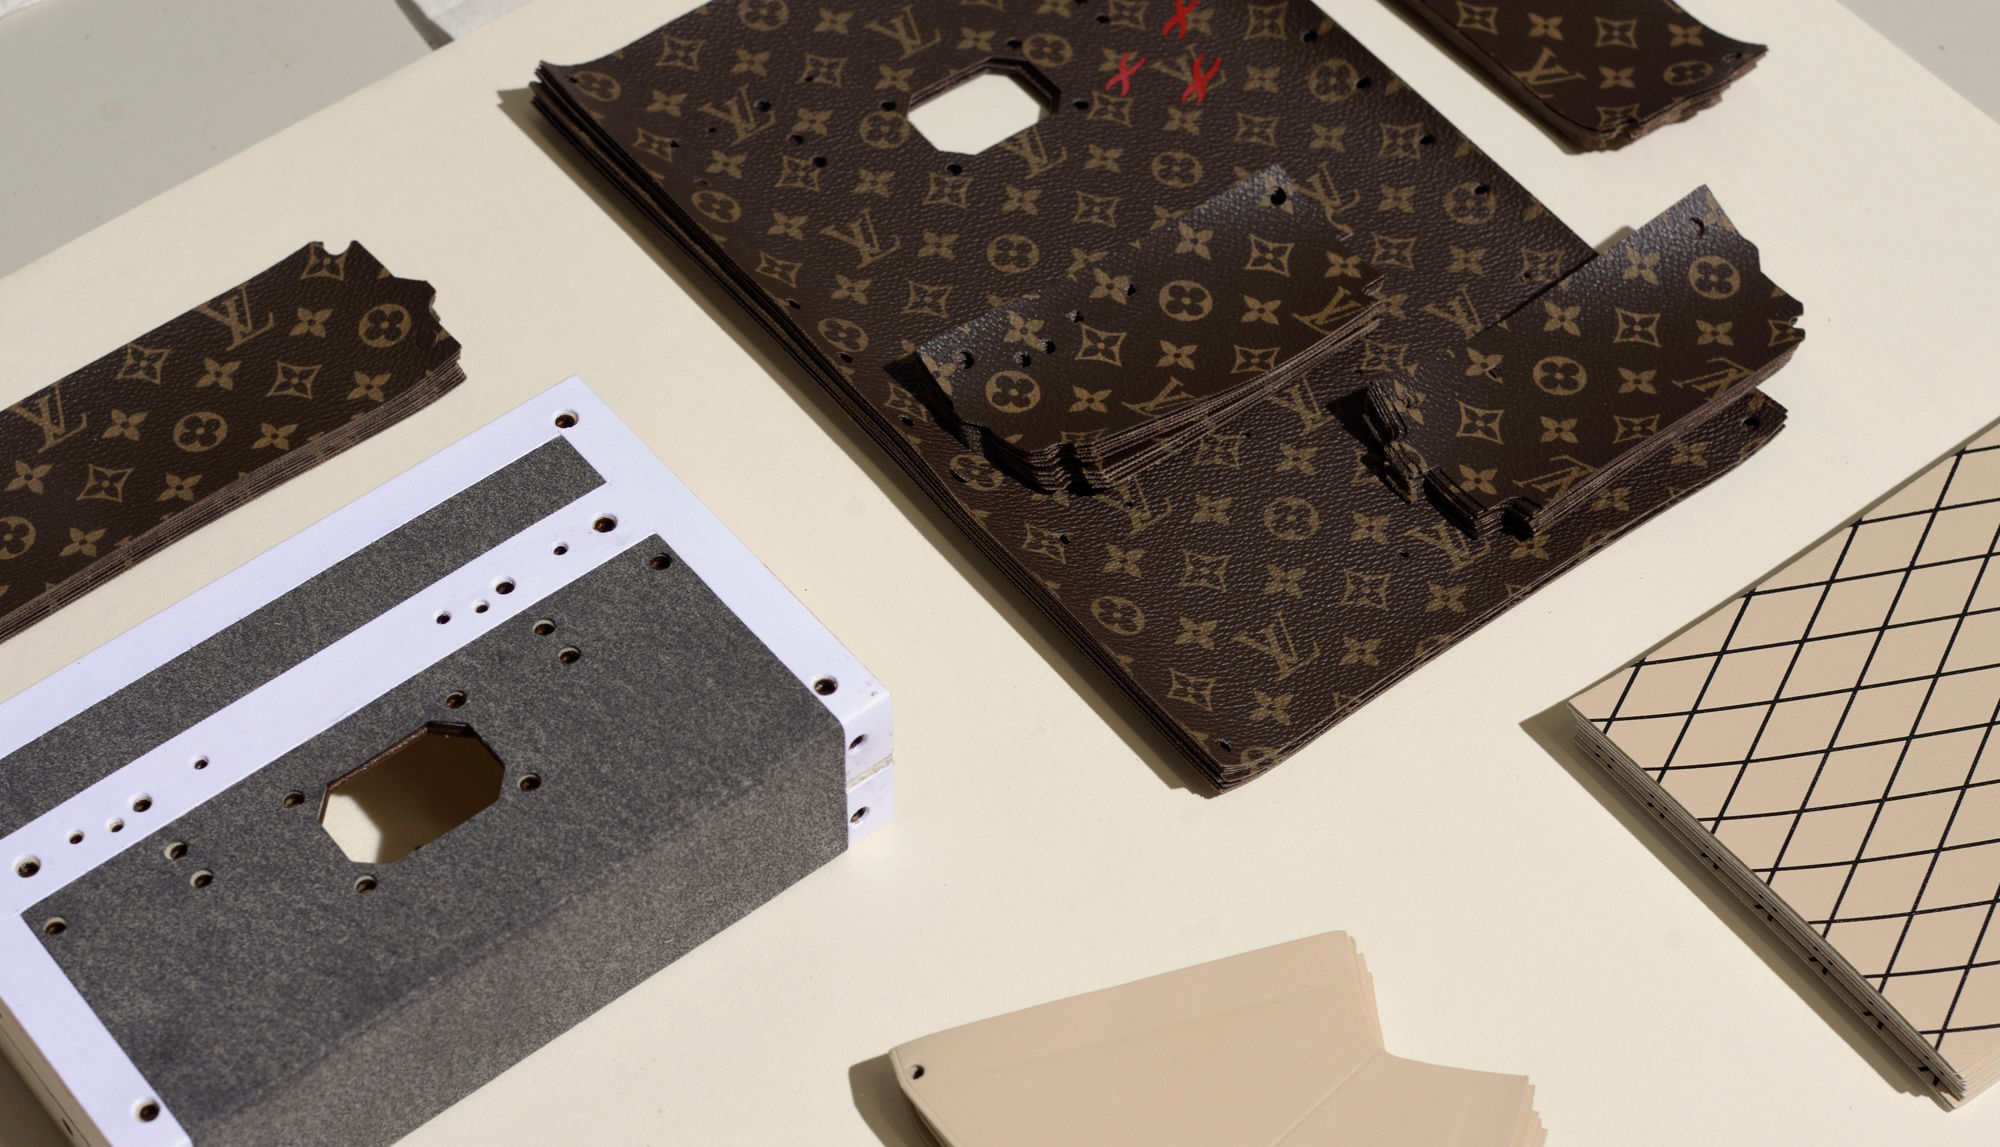 Louis Vuitton Time Capsule is making its way to KL for a limited